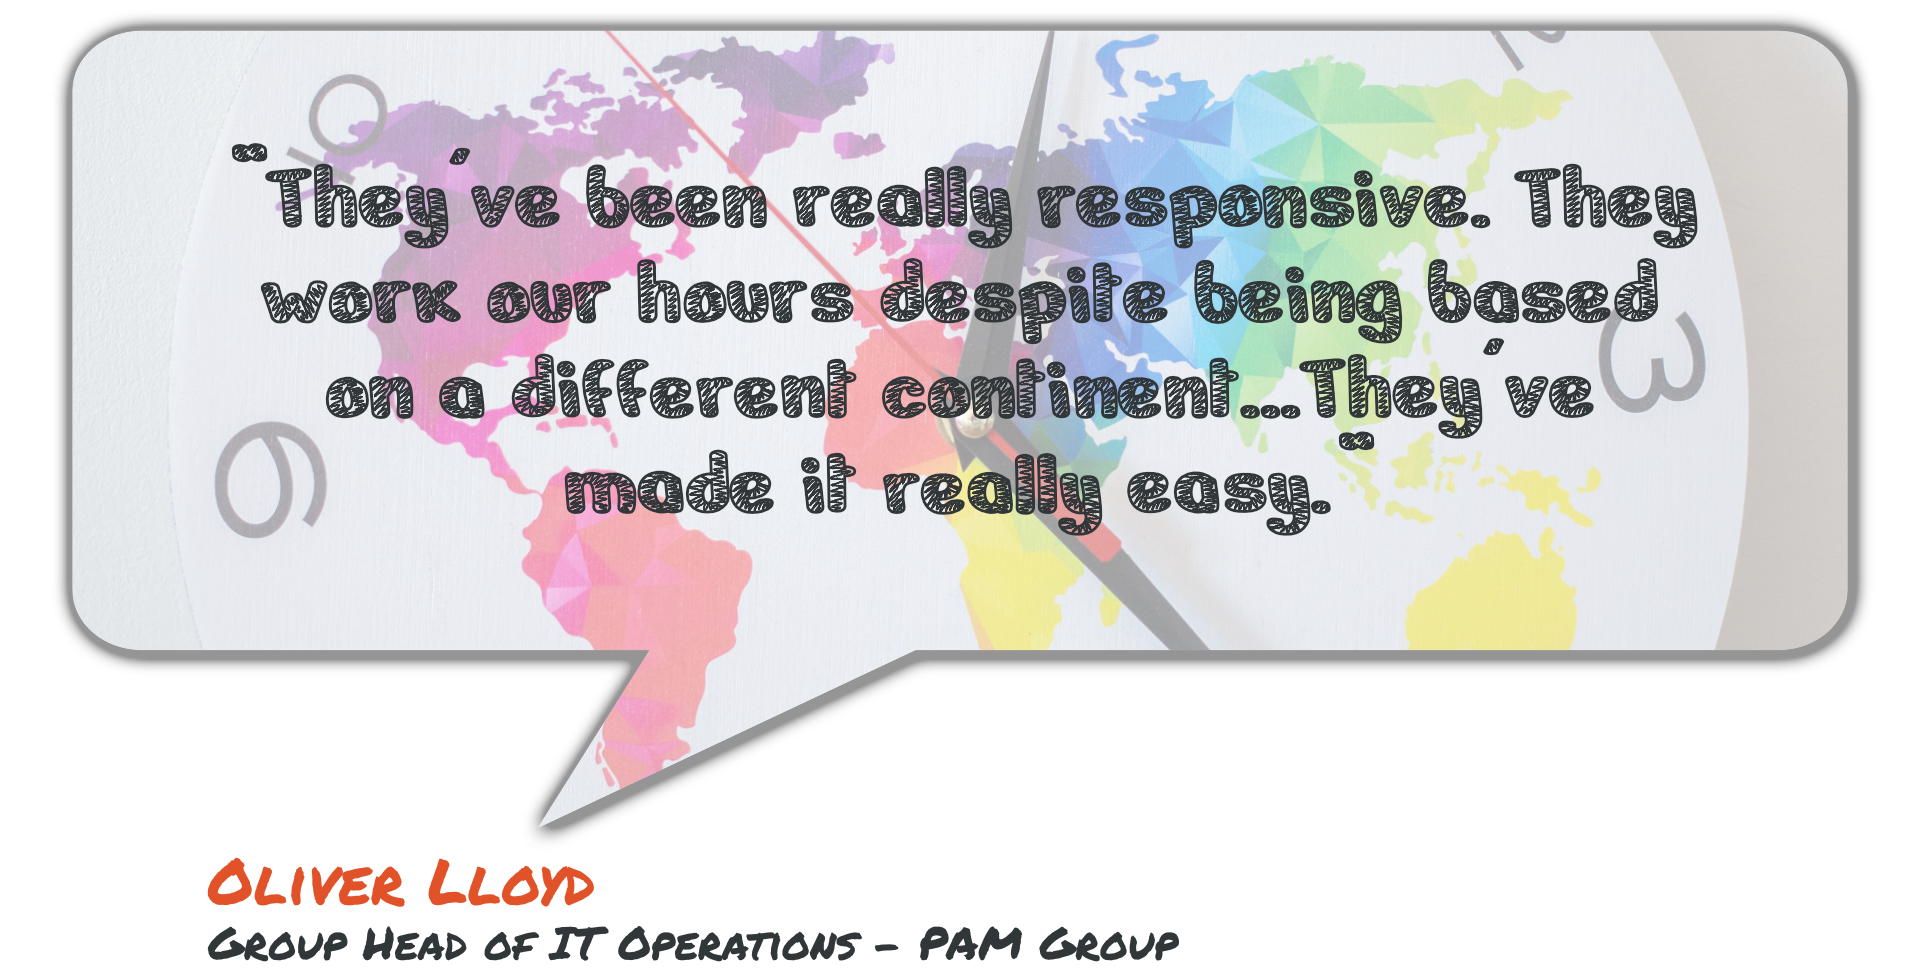 square speech bubble with rounded corners and a background image of a zoomed in clock with a map of the world on the clock face. Text in a handwritten style reads "They've been really responsive. They work our hours despite being based on a different continent... They've made it really easy" - Oliver Lloyd Group Head of IT Ops - PAM Group